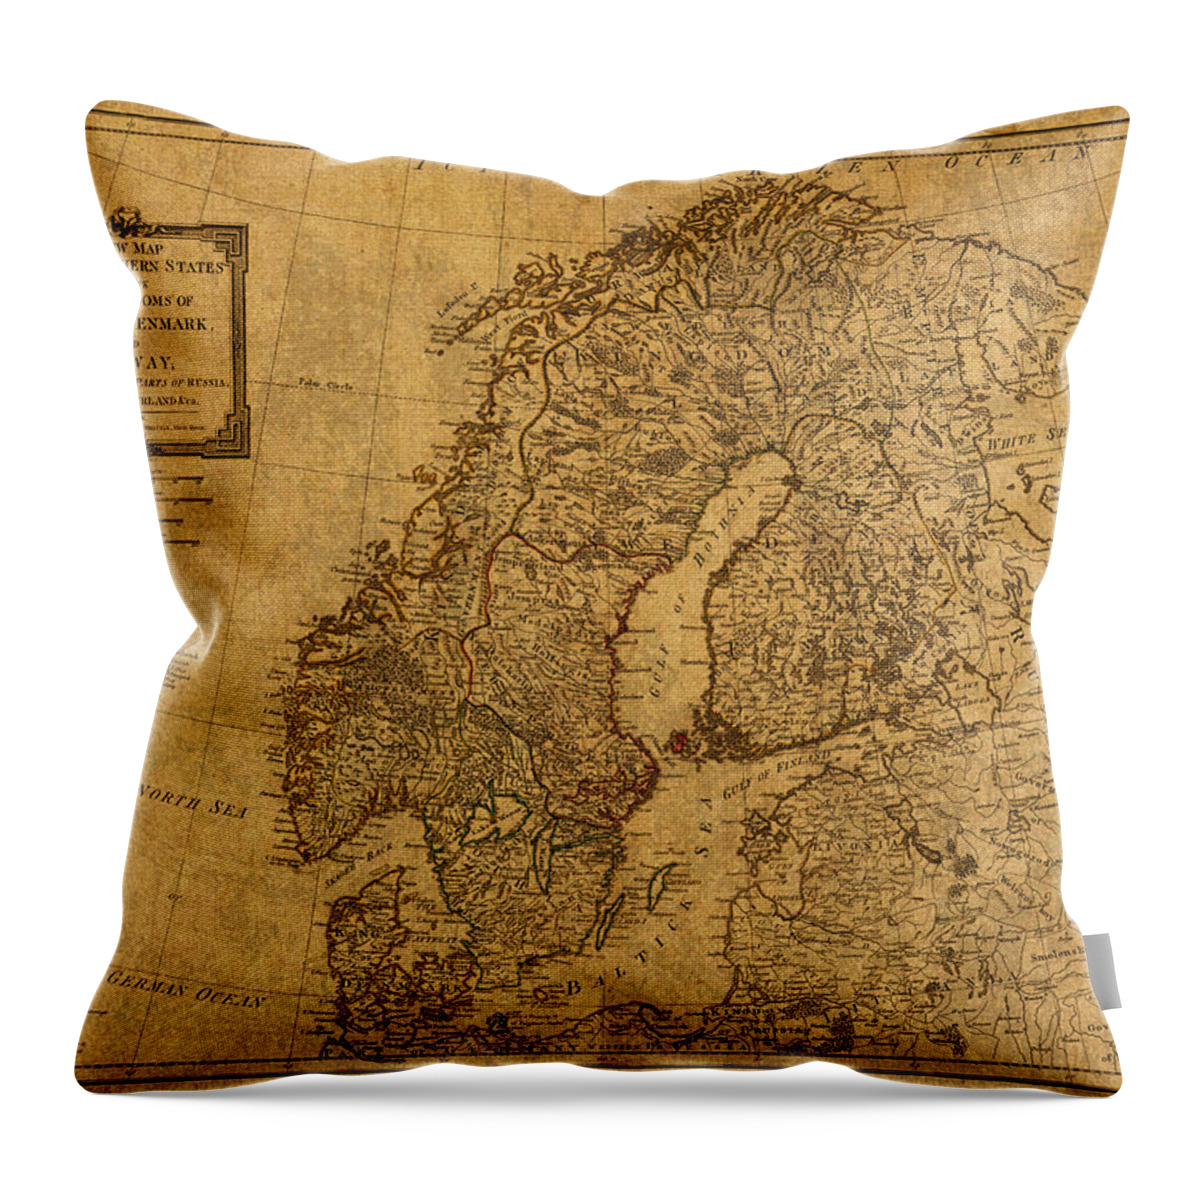 Map Throw Pillow featuring the mixed media Map of Norway Sweden Denmark and Scandinavia Circa 1794 on Worn Distressed Parchment by Design Turnpike